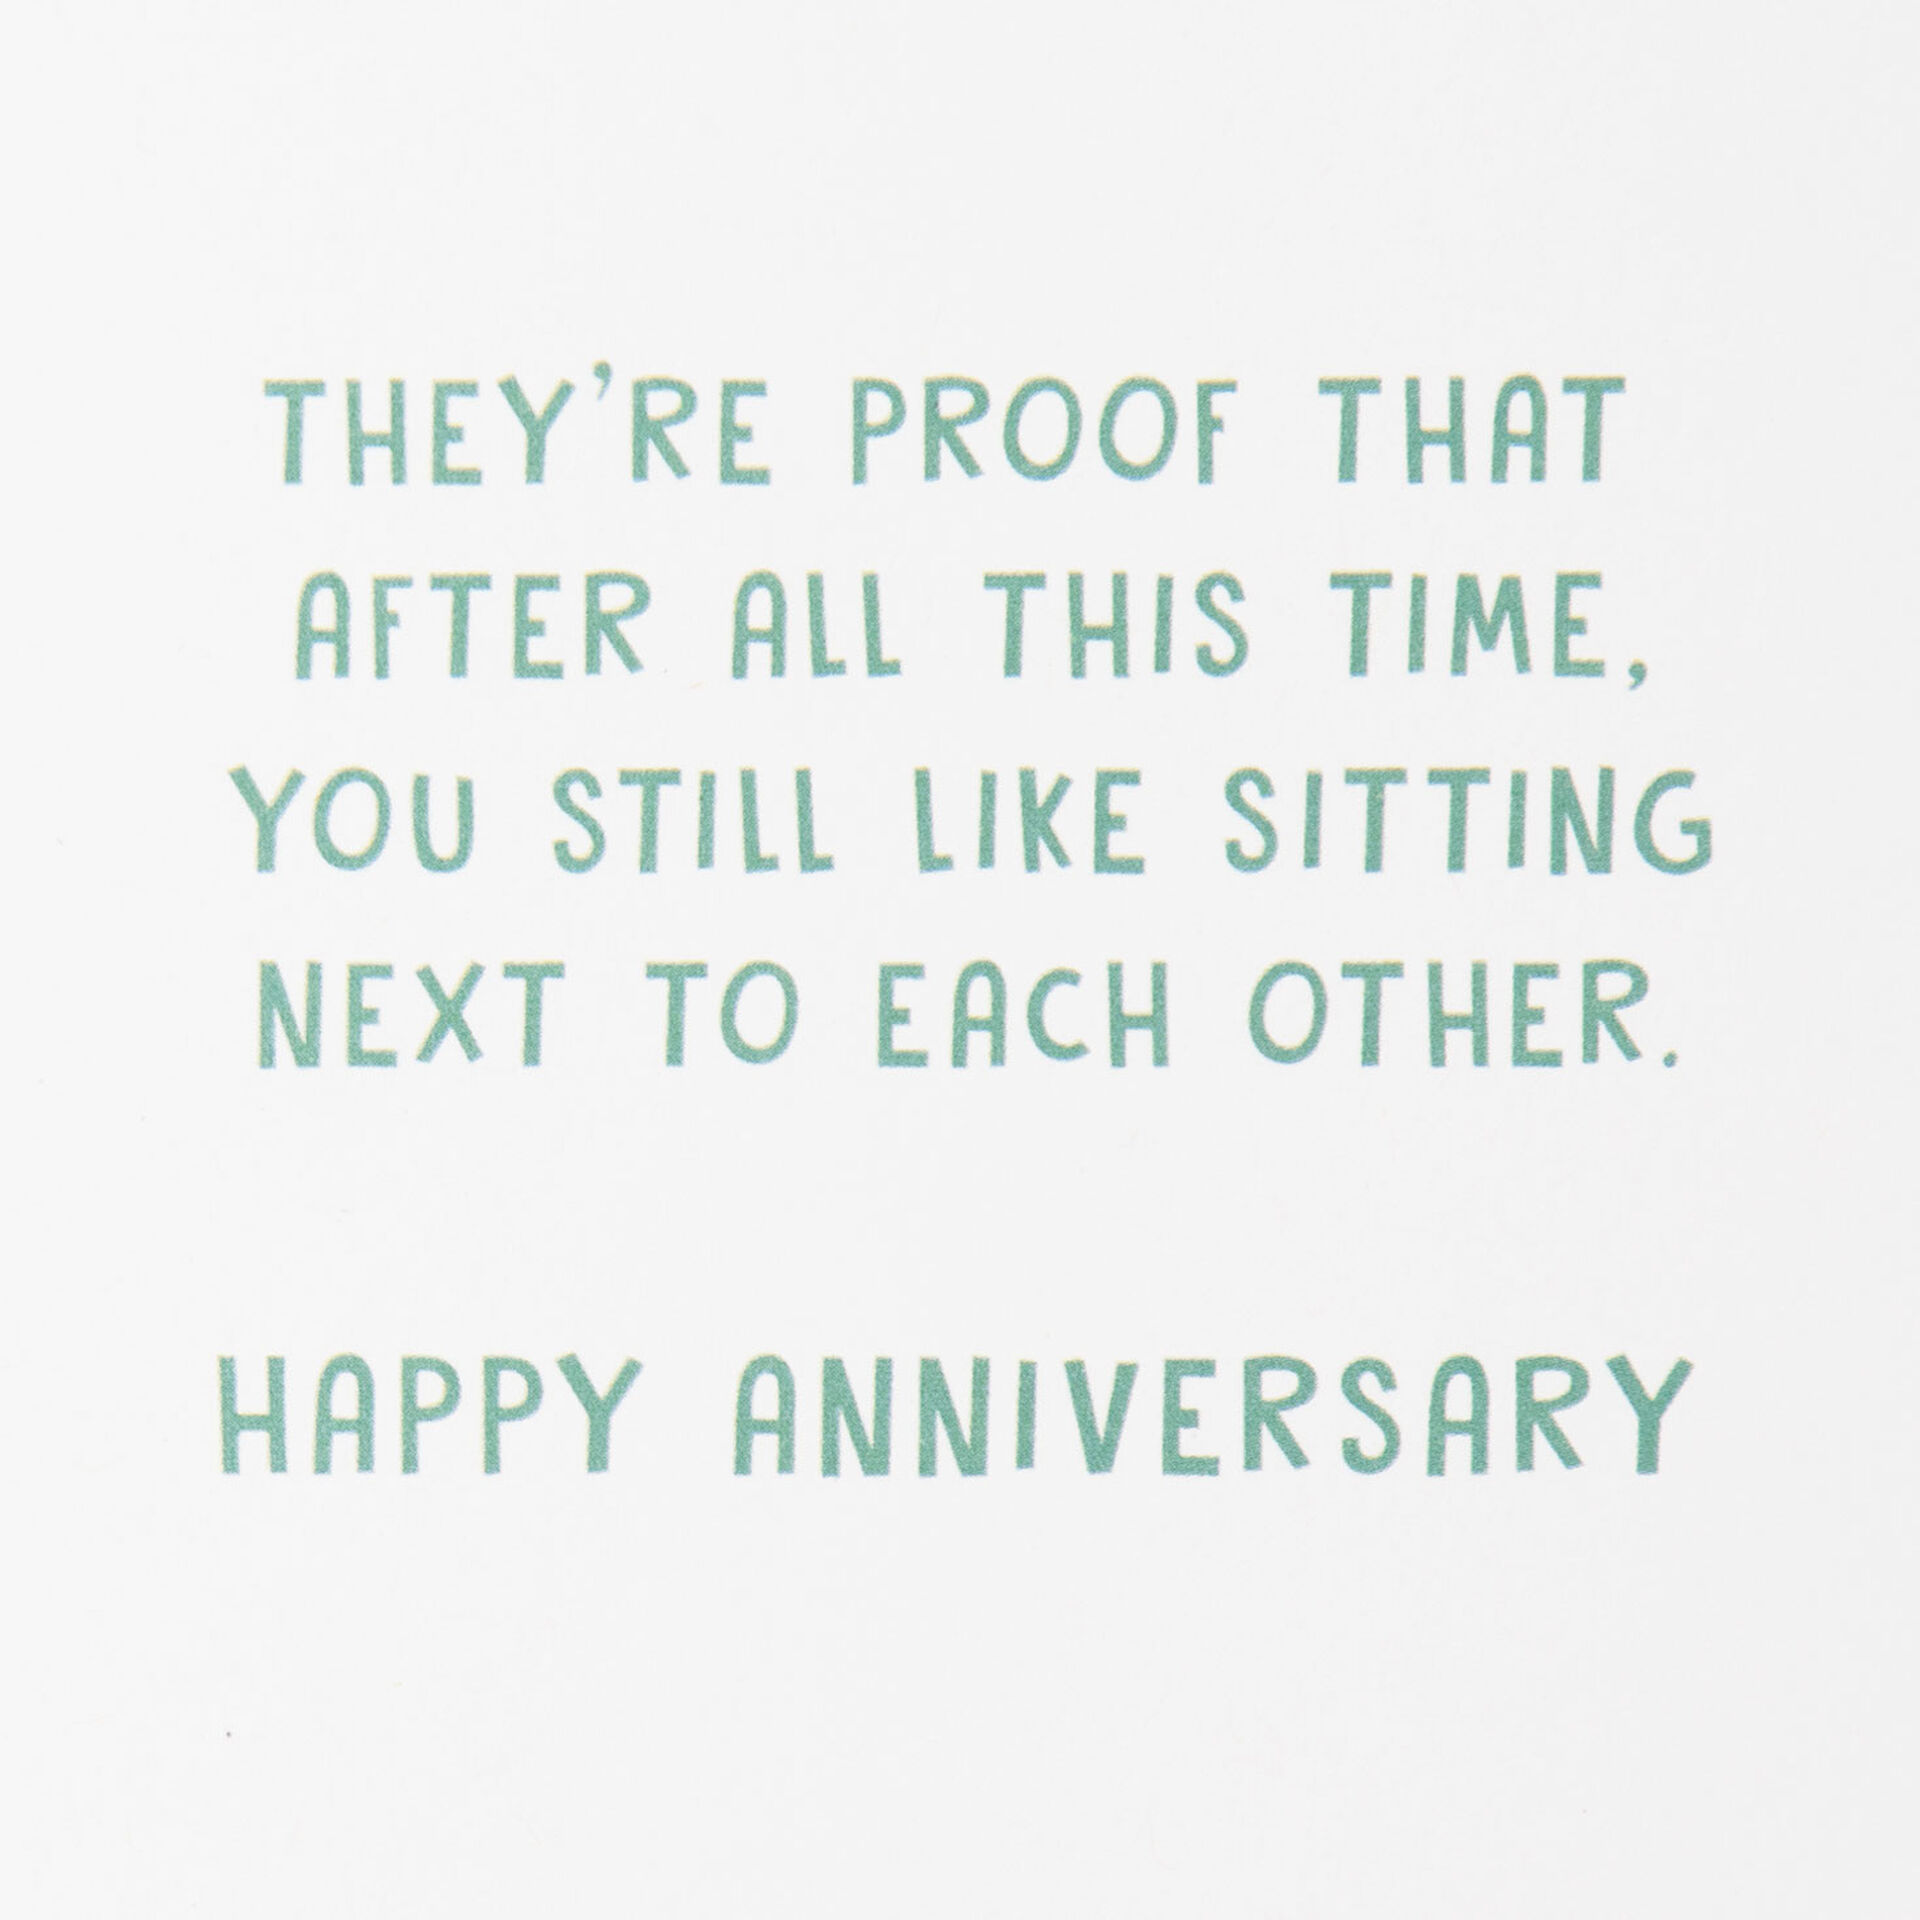 Butt-Dents-in-Sofa-Funny-Anniversary-Card-for-Couple_399ZZS6501_02